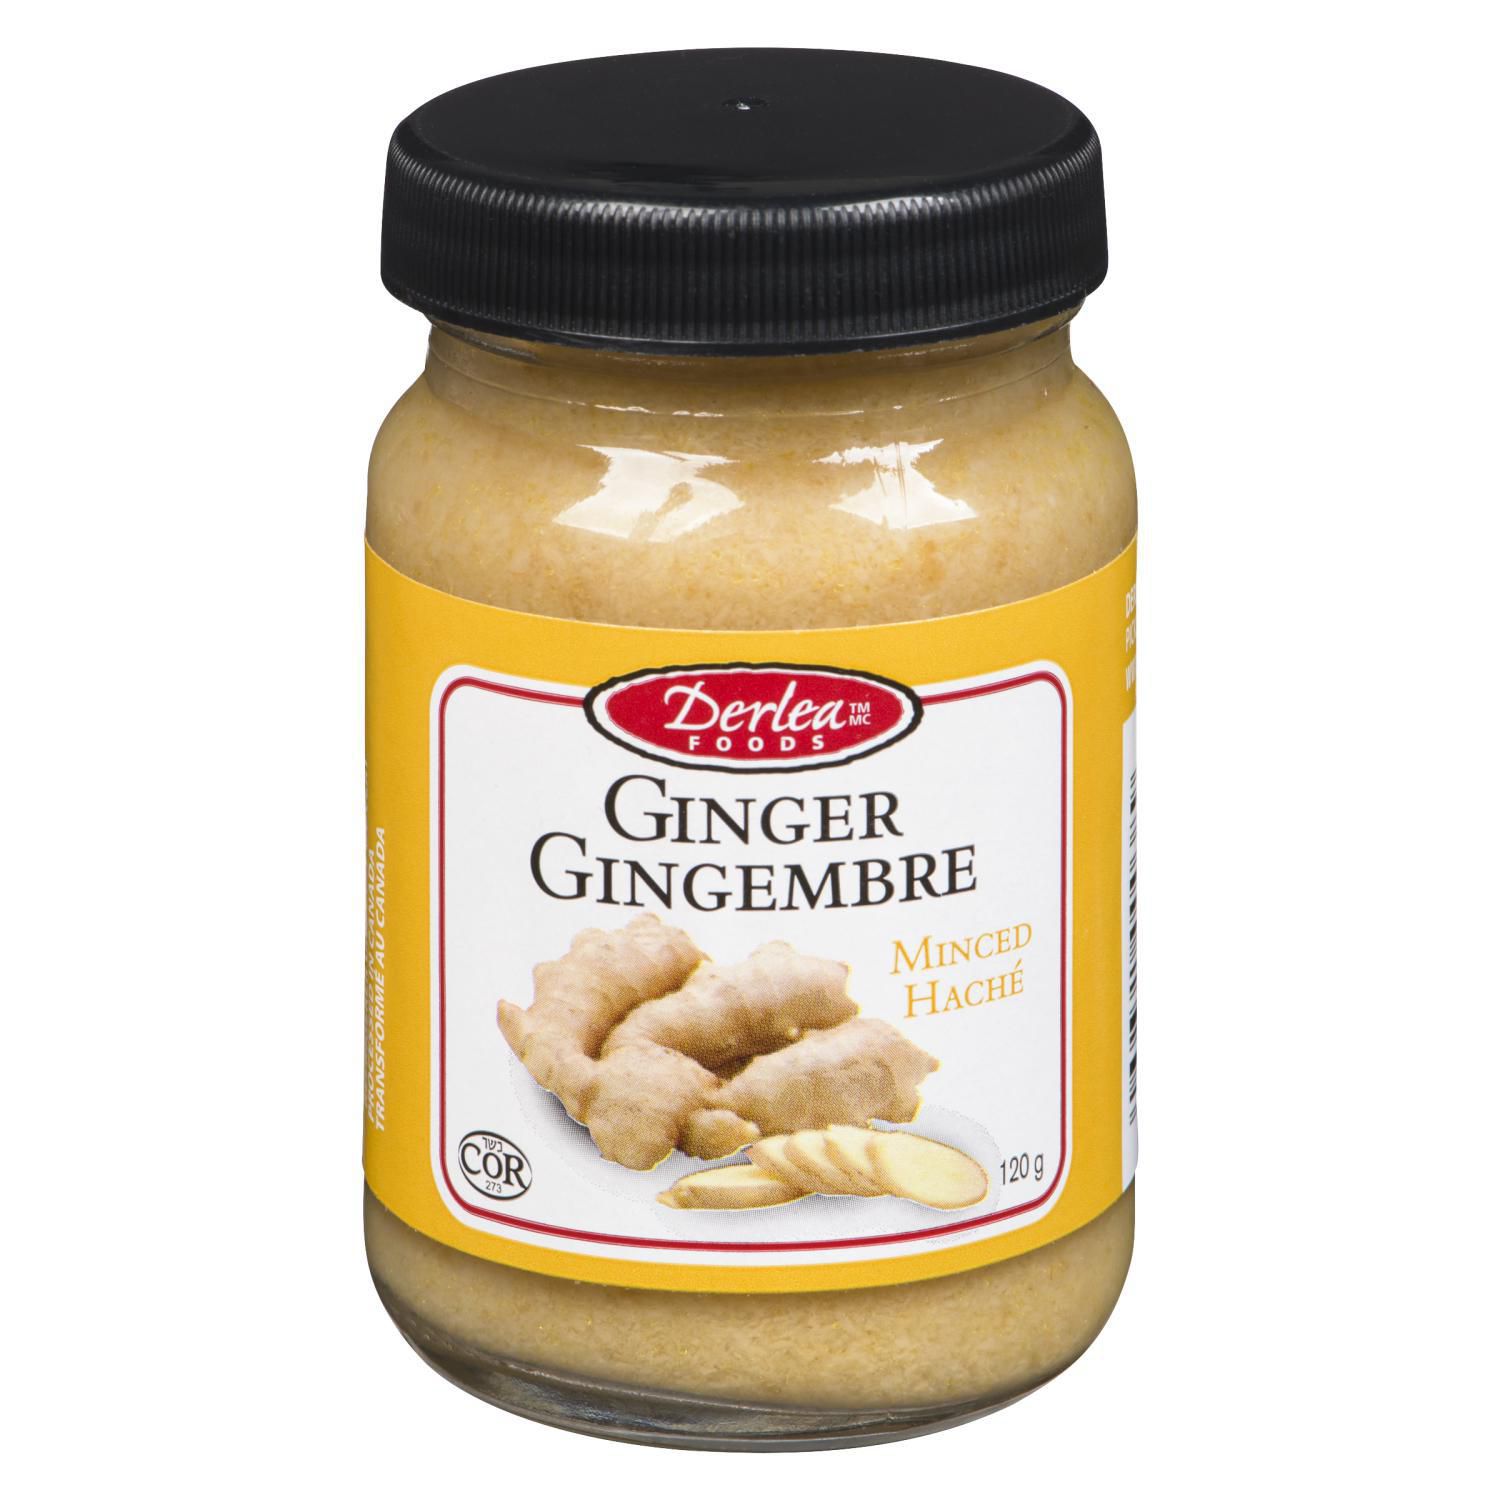 Where Is Minced Ginger In The Grocery Store